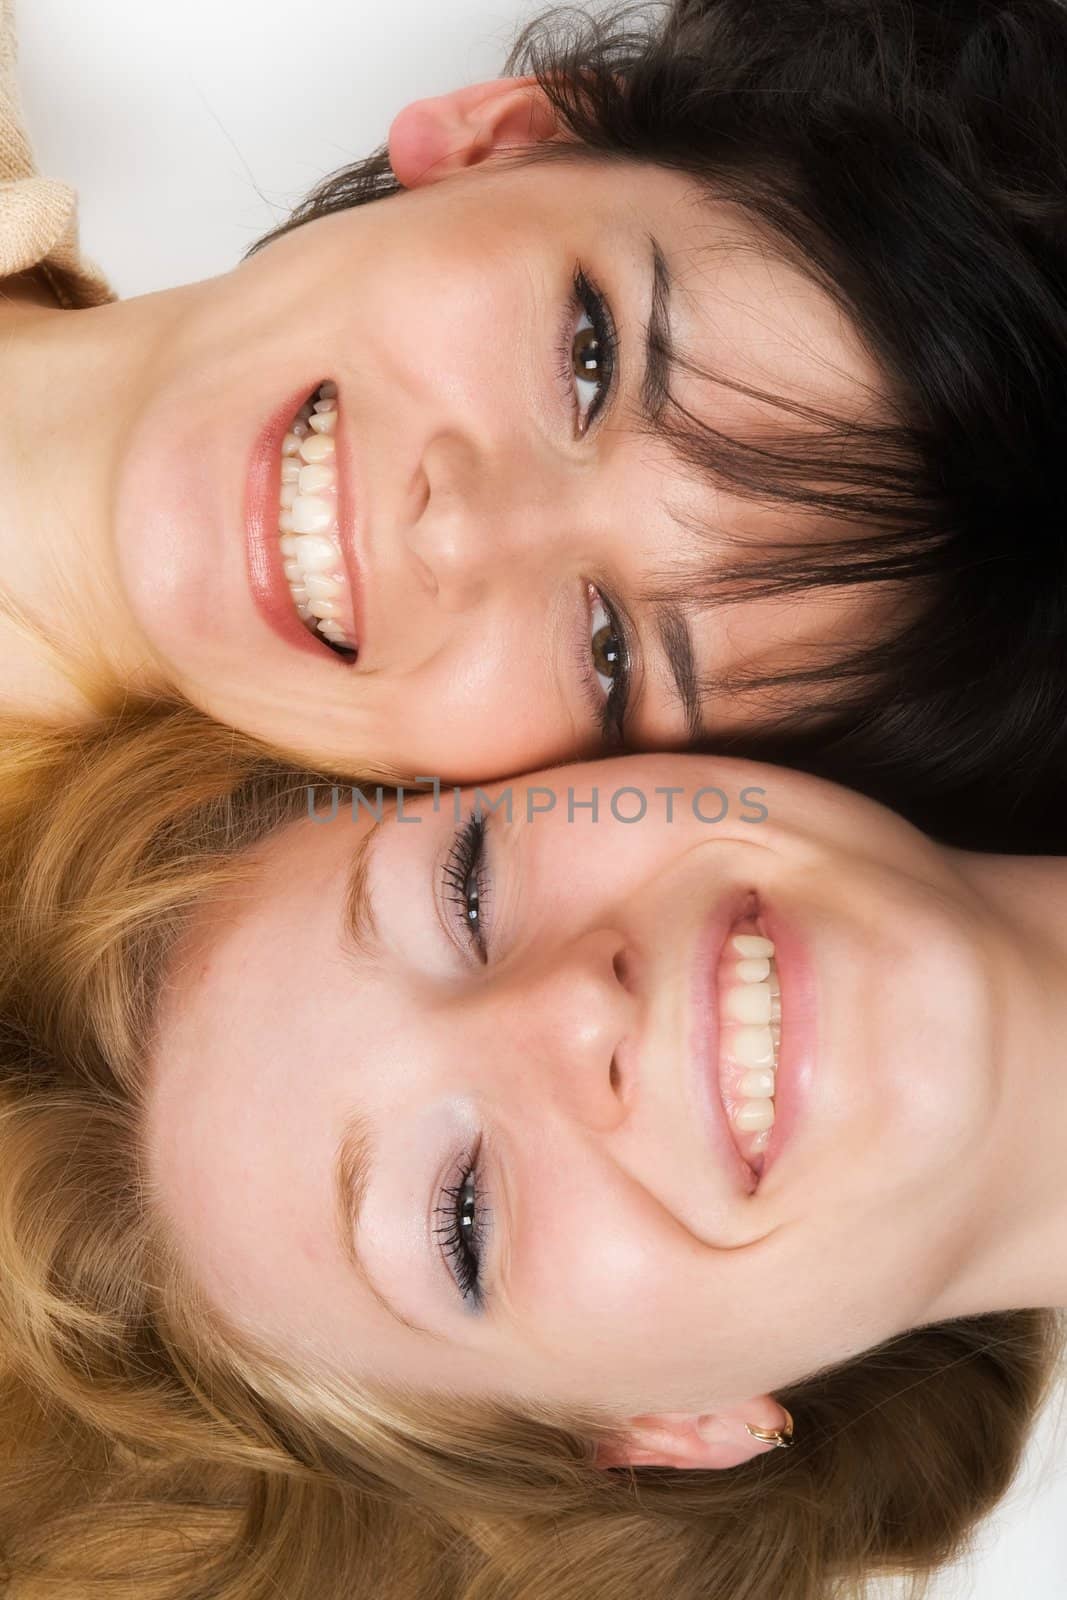 happy young women. by stepanov